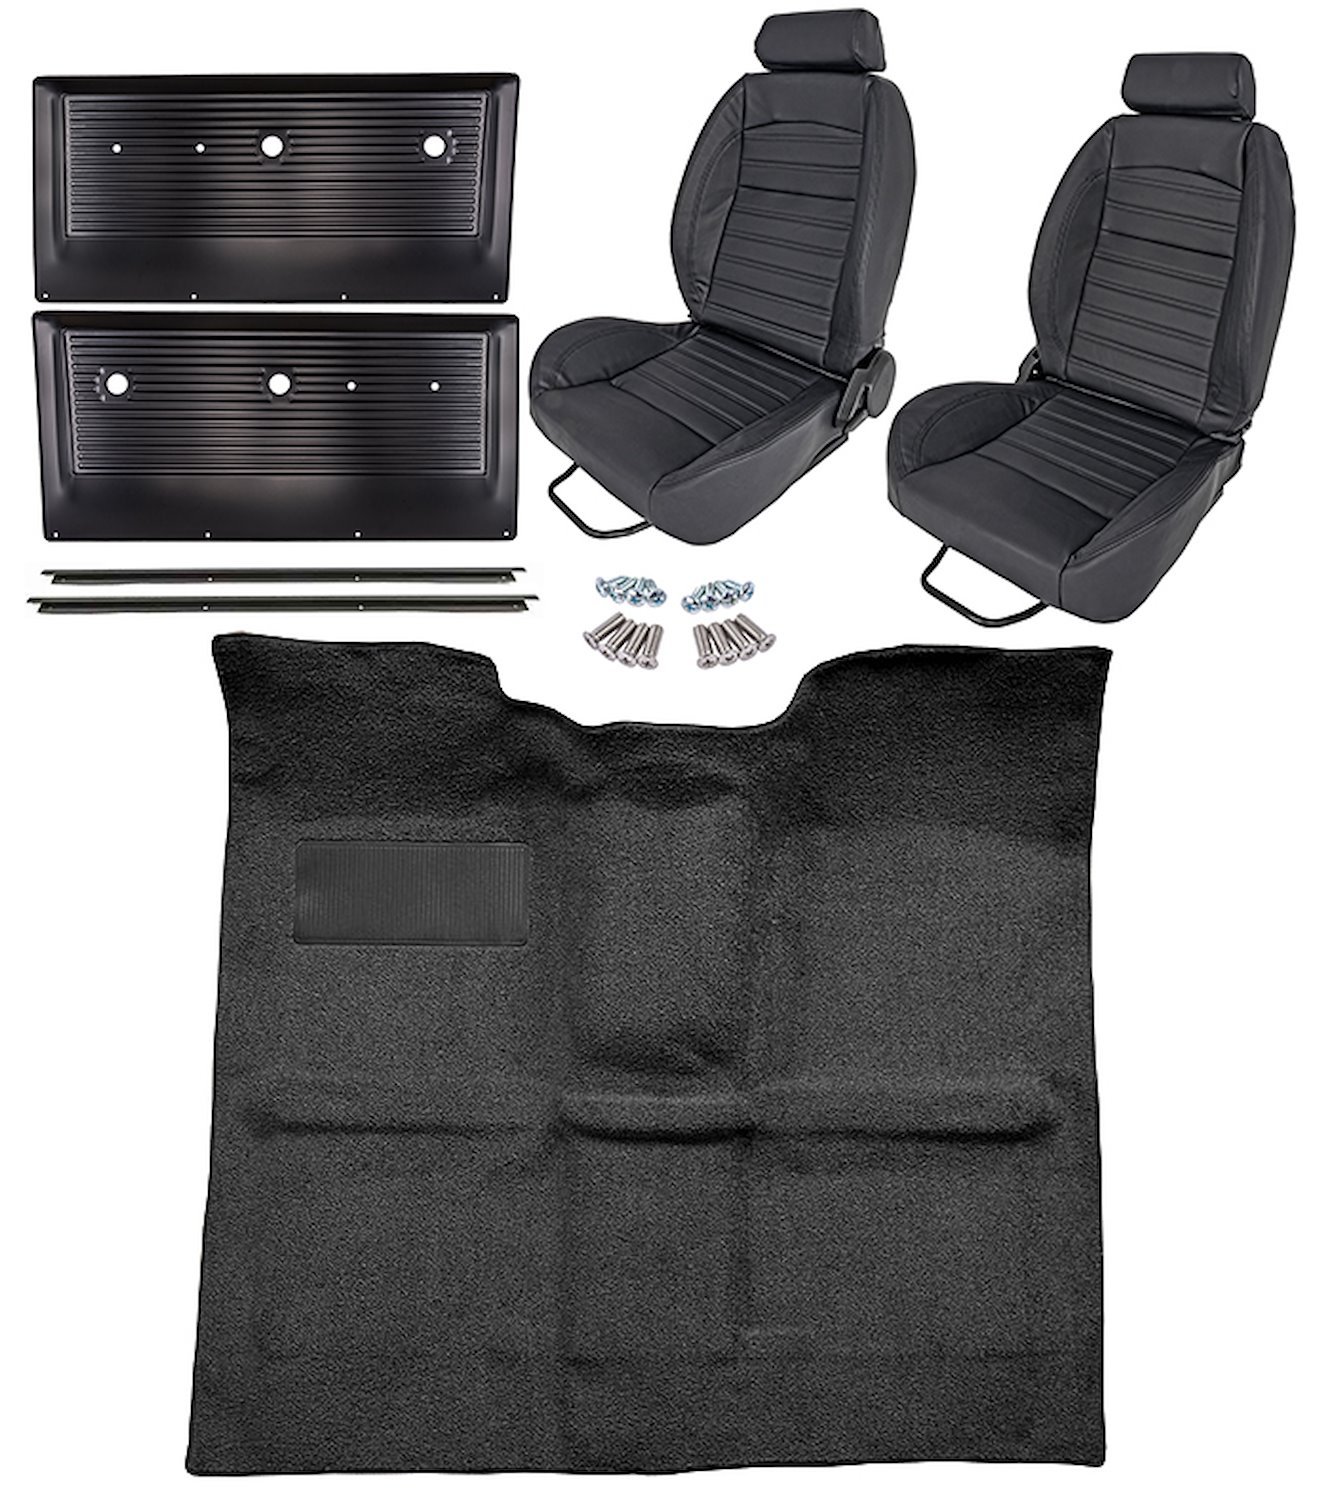 Black Interior Kit w/High-Back Buckets for 1967-1972 GM C Series Regular Cab Truck w/o Gas Tank in Cab, 4-Speed